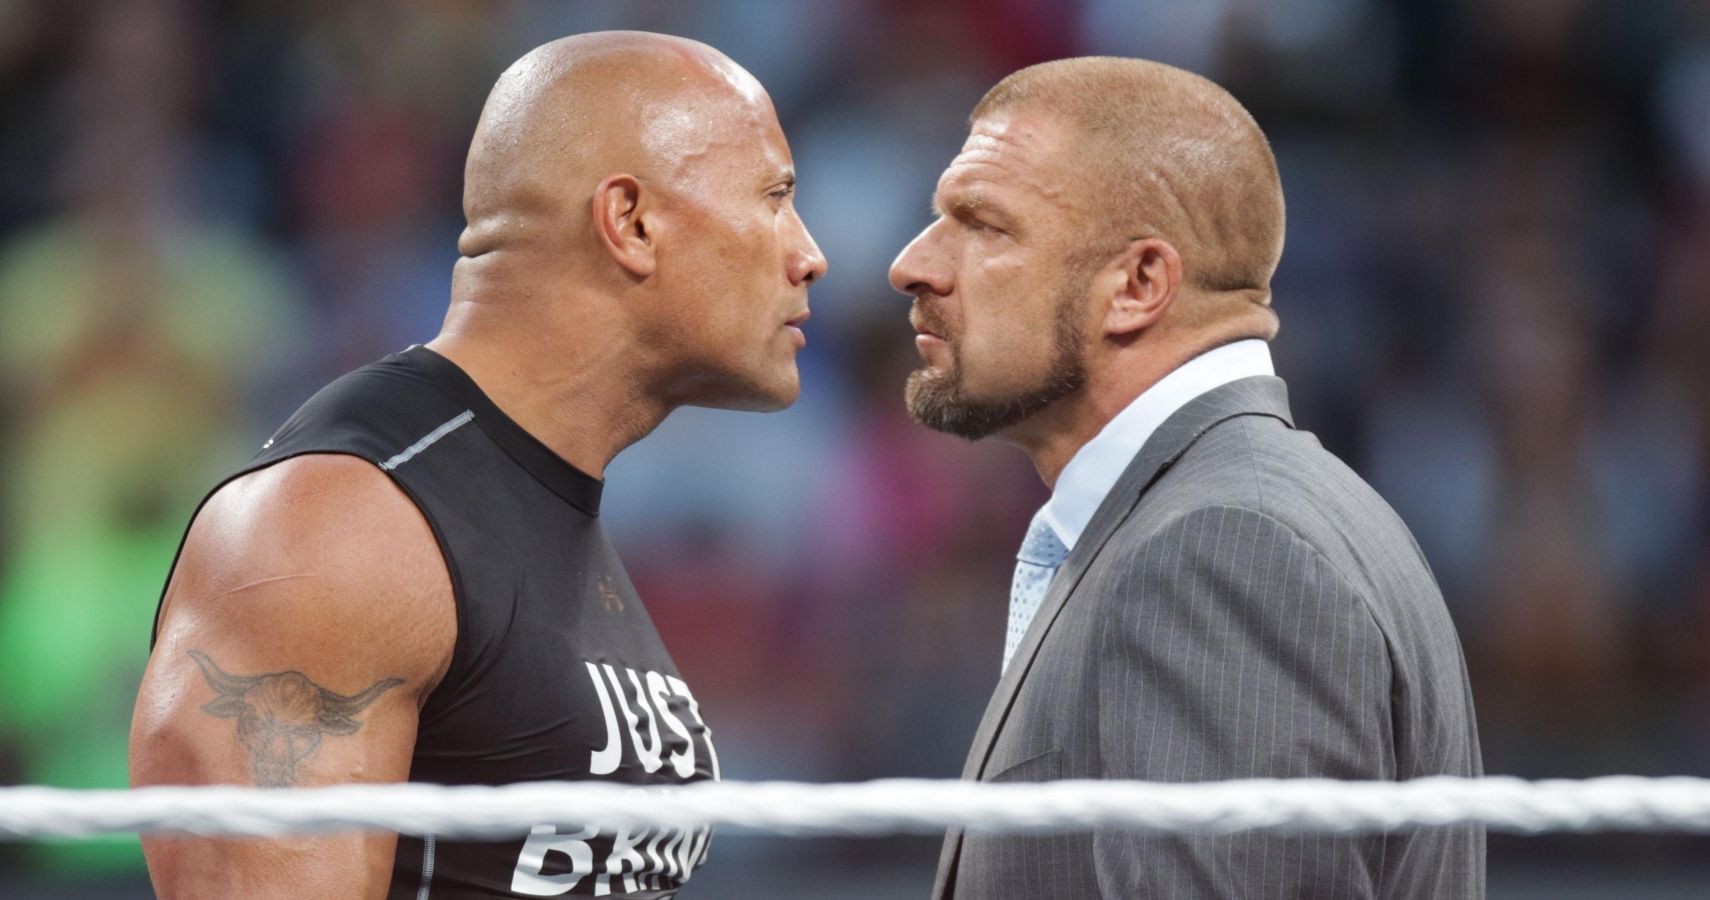 The Rock and Triple H